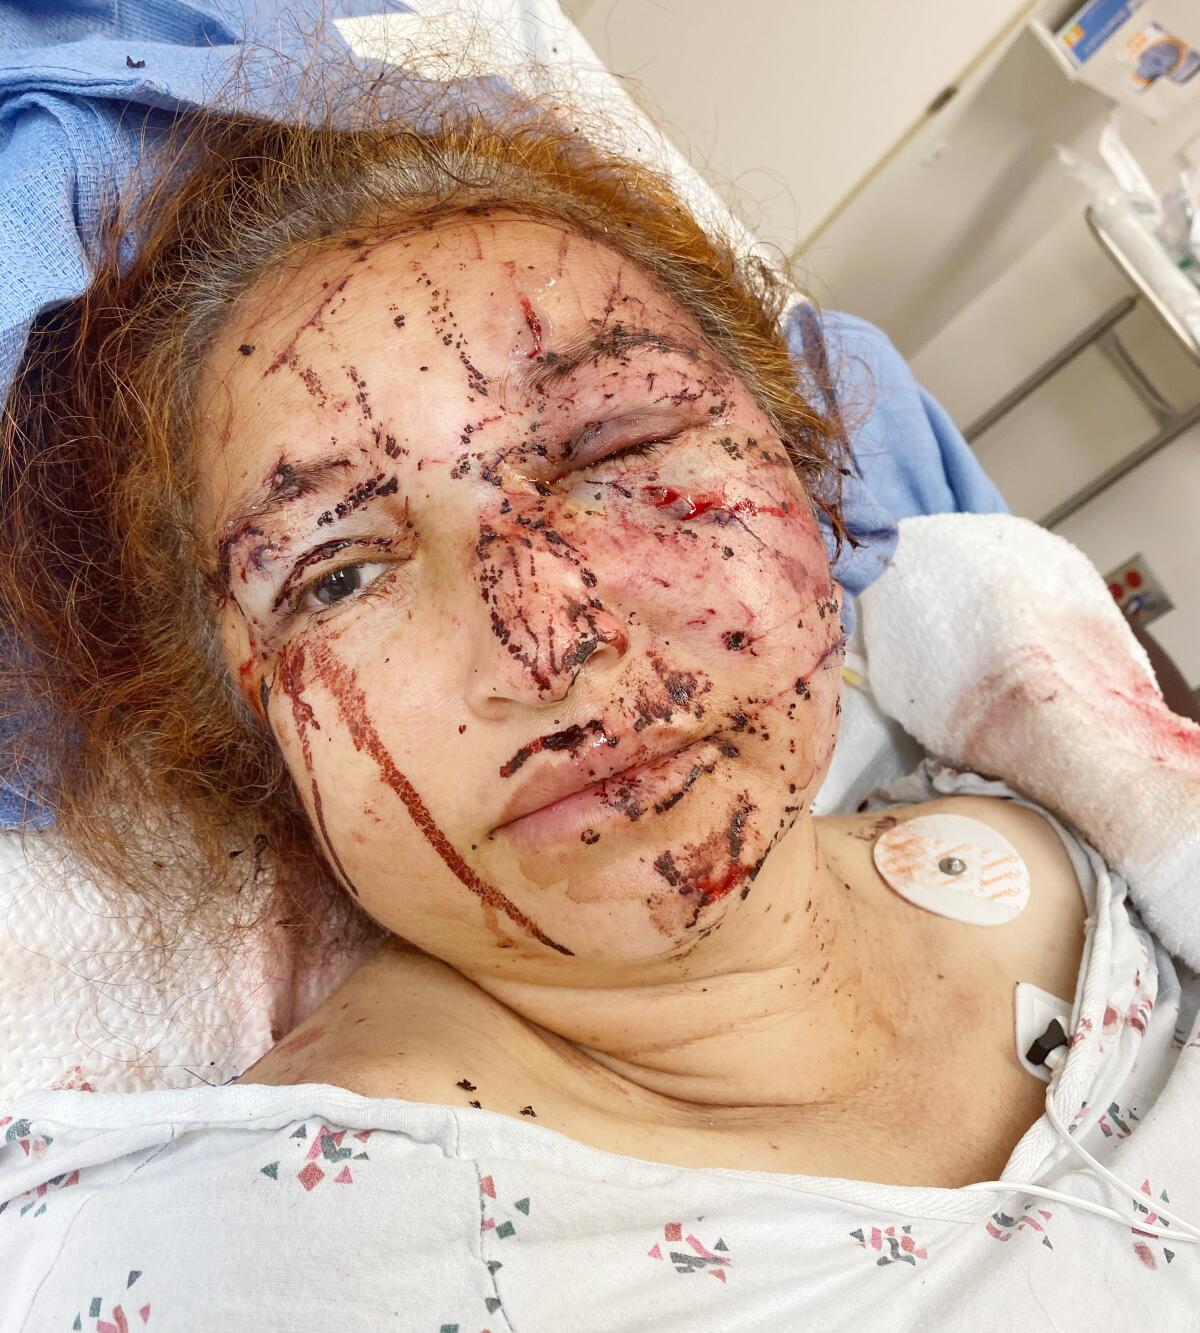 Claudia Silva was severely injured when the LAPD detonated a cache of illegal fireworks outside her home in South L.A.